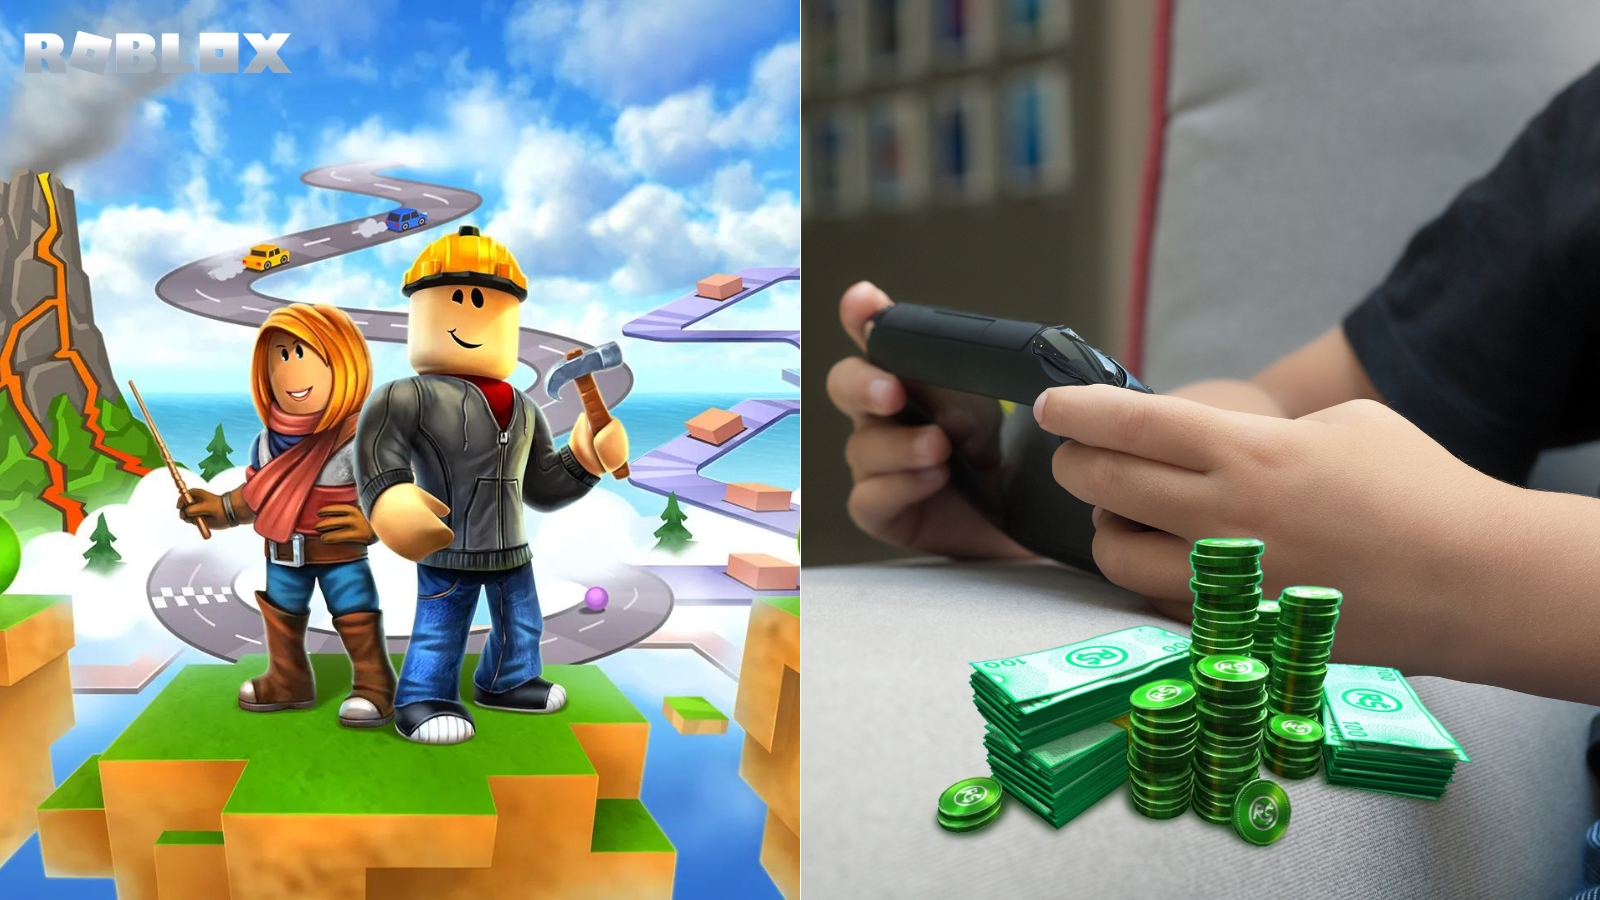 Roblox and Underage Gambling at the Center of New Lawsuit 